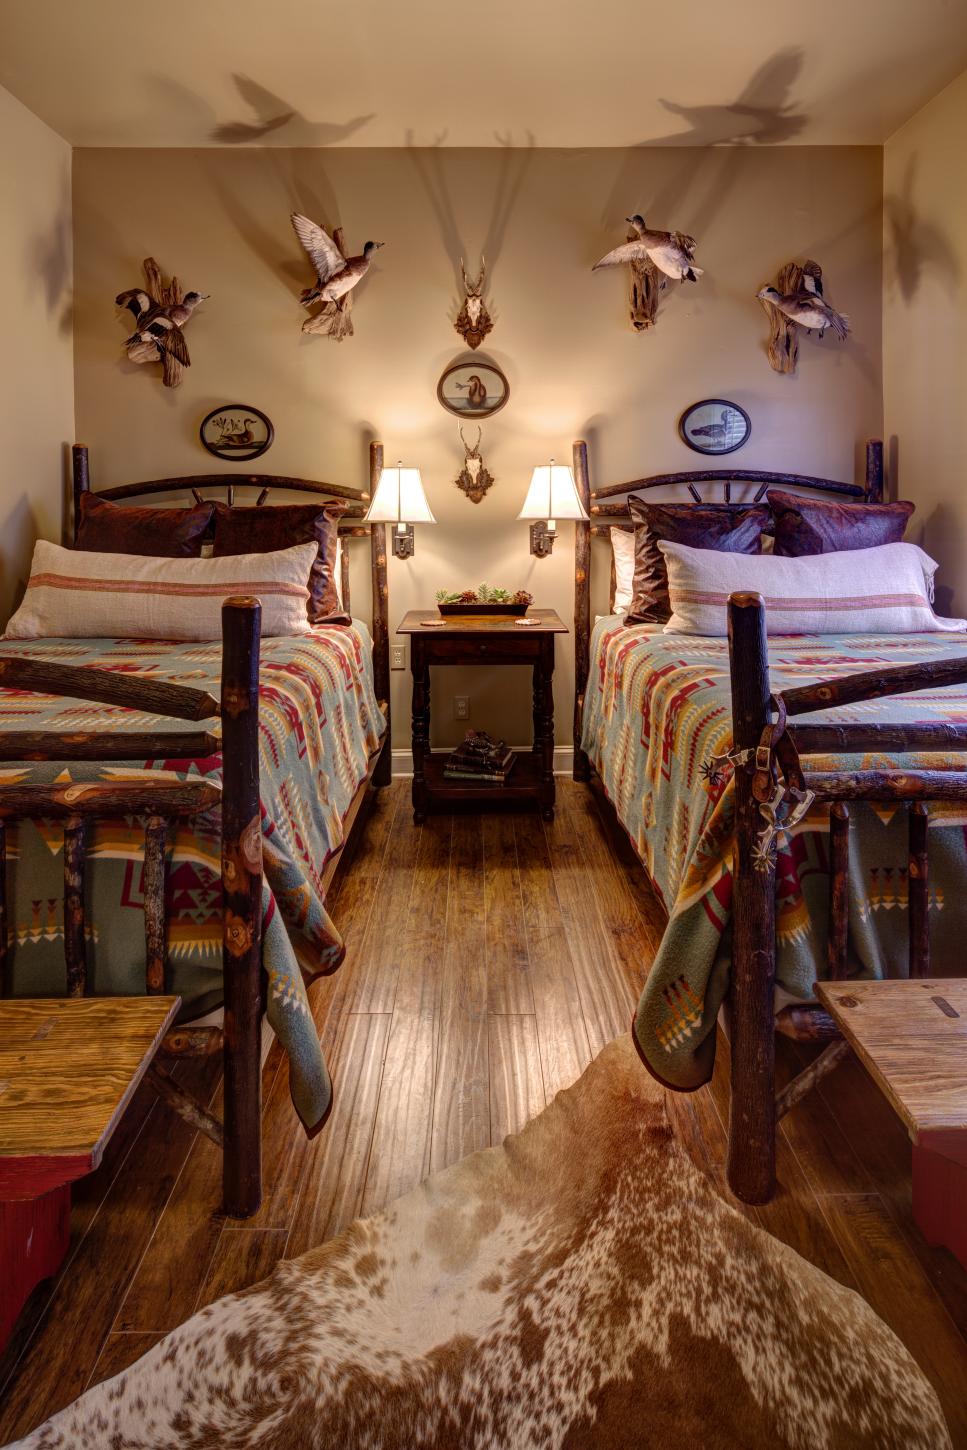 Lodge-Style Bedroom Boasts Mounted Birds and Log Beds | HGTV